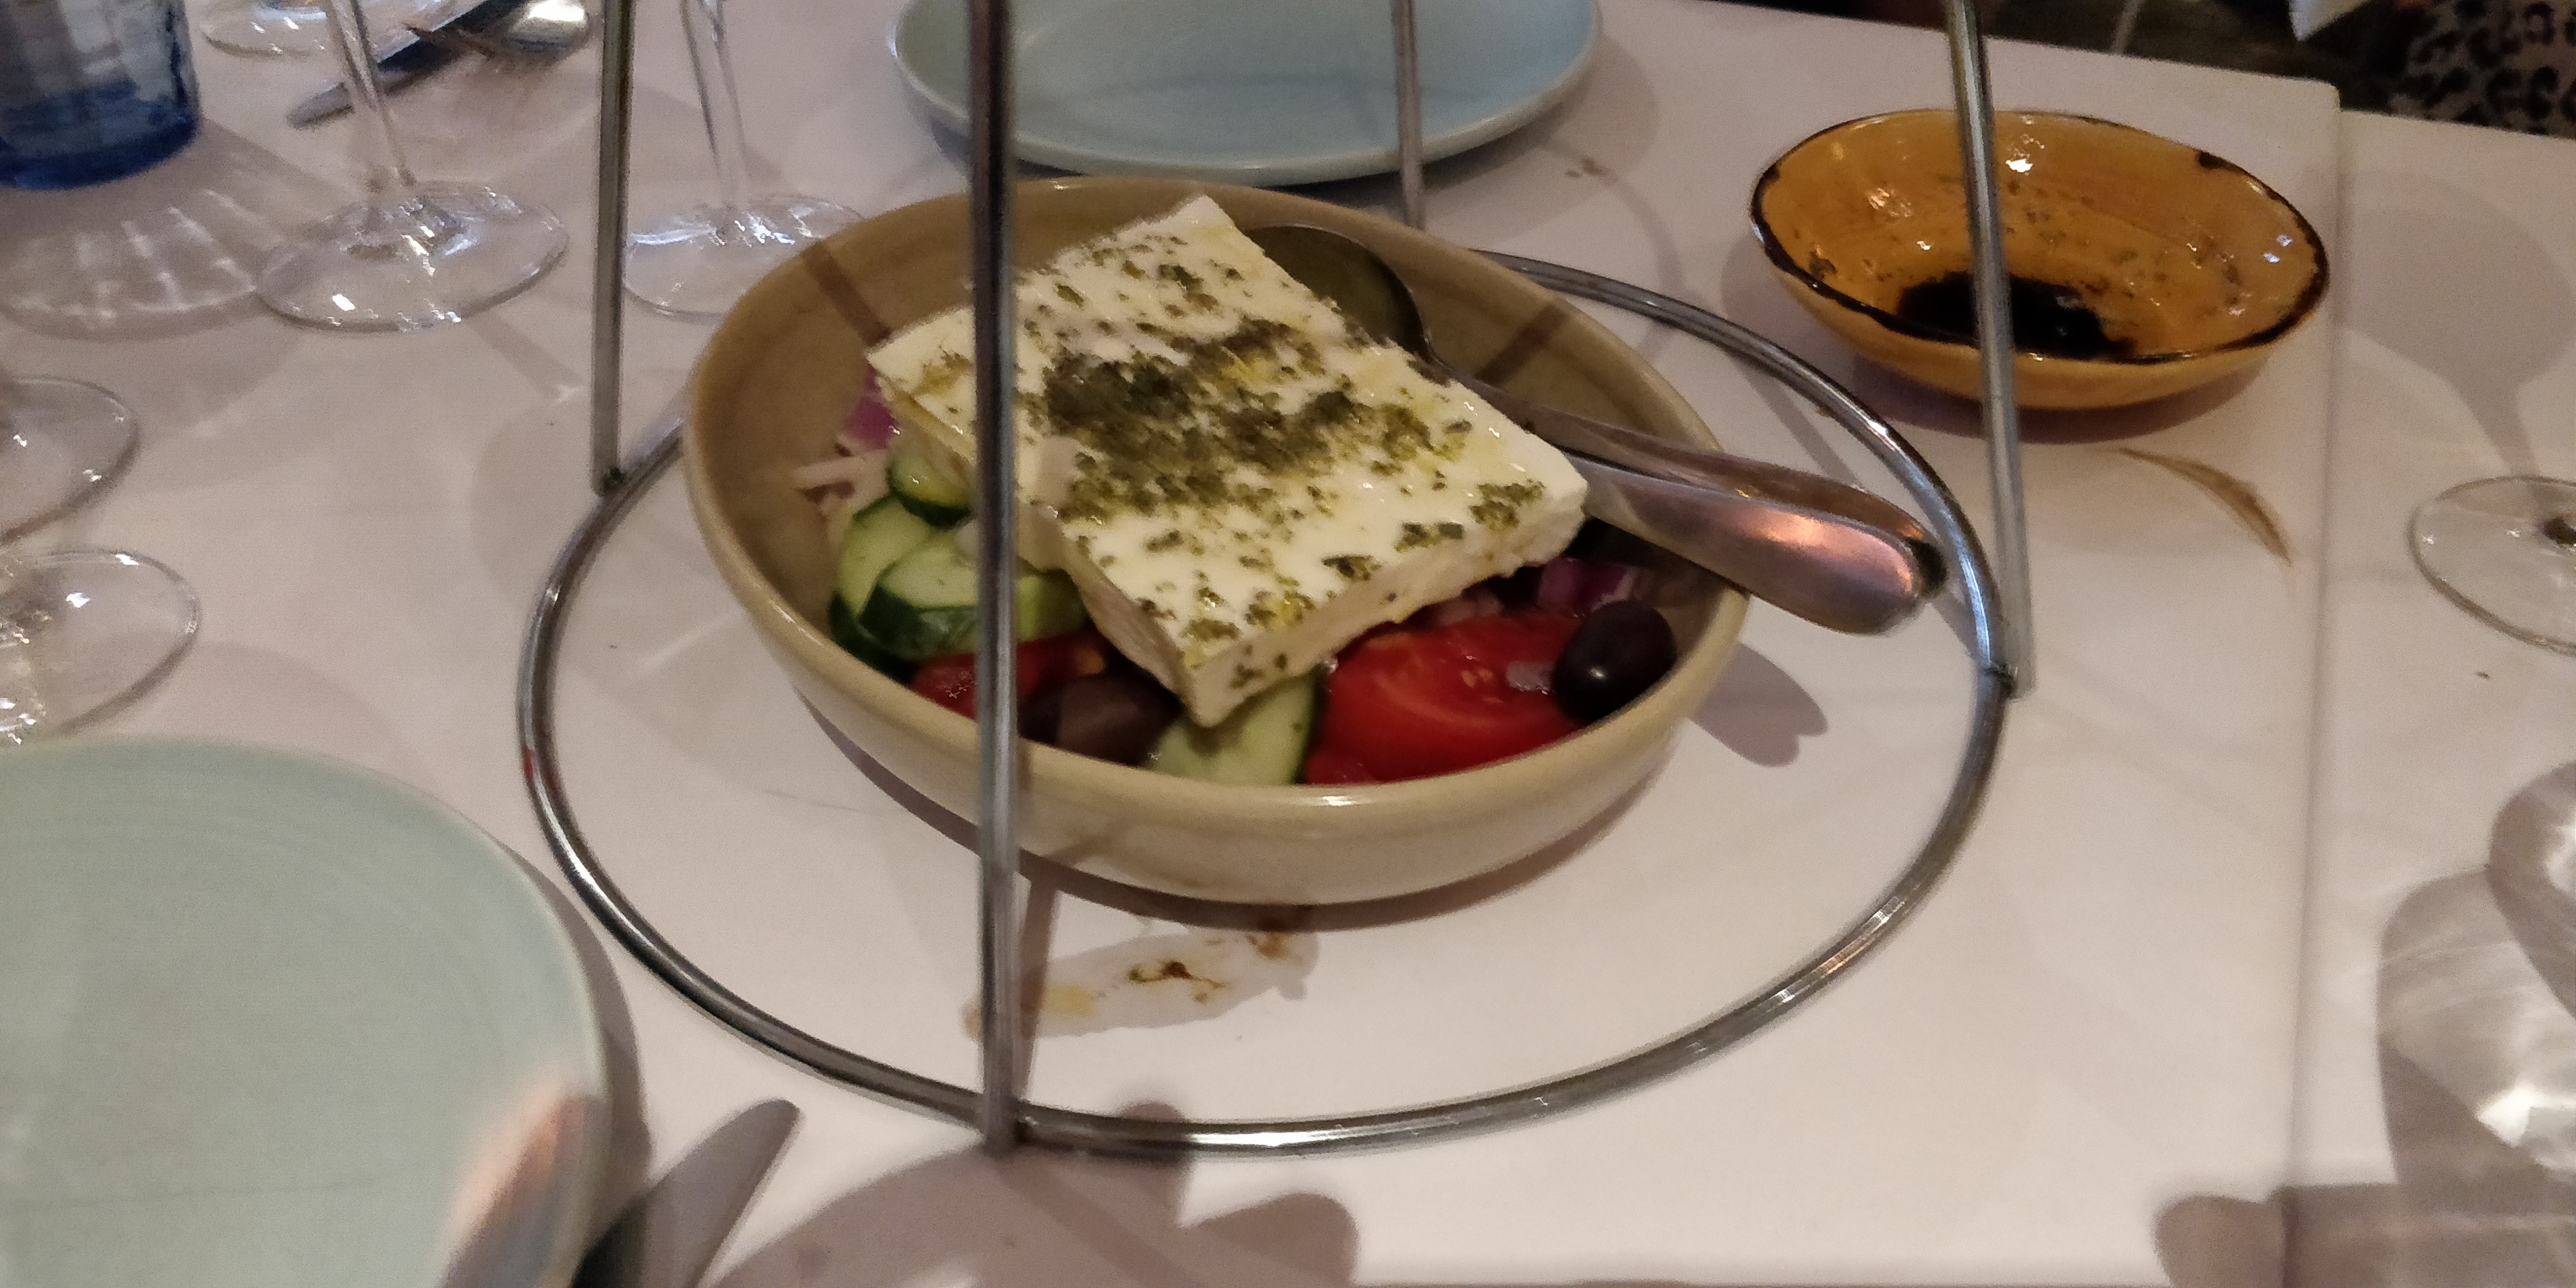 A PICTURE OF LEMNOS GREEK SALAD